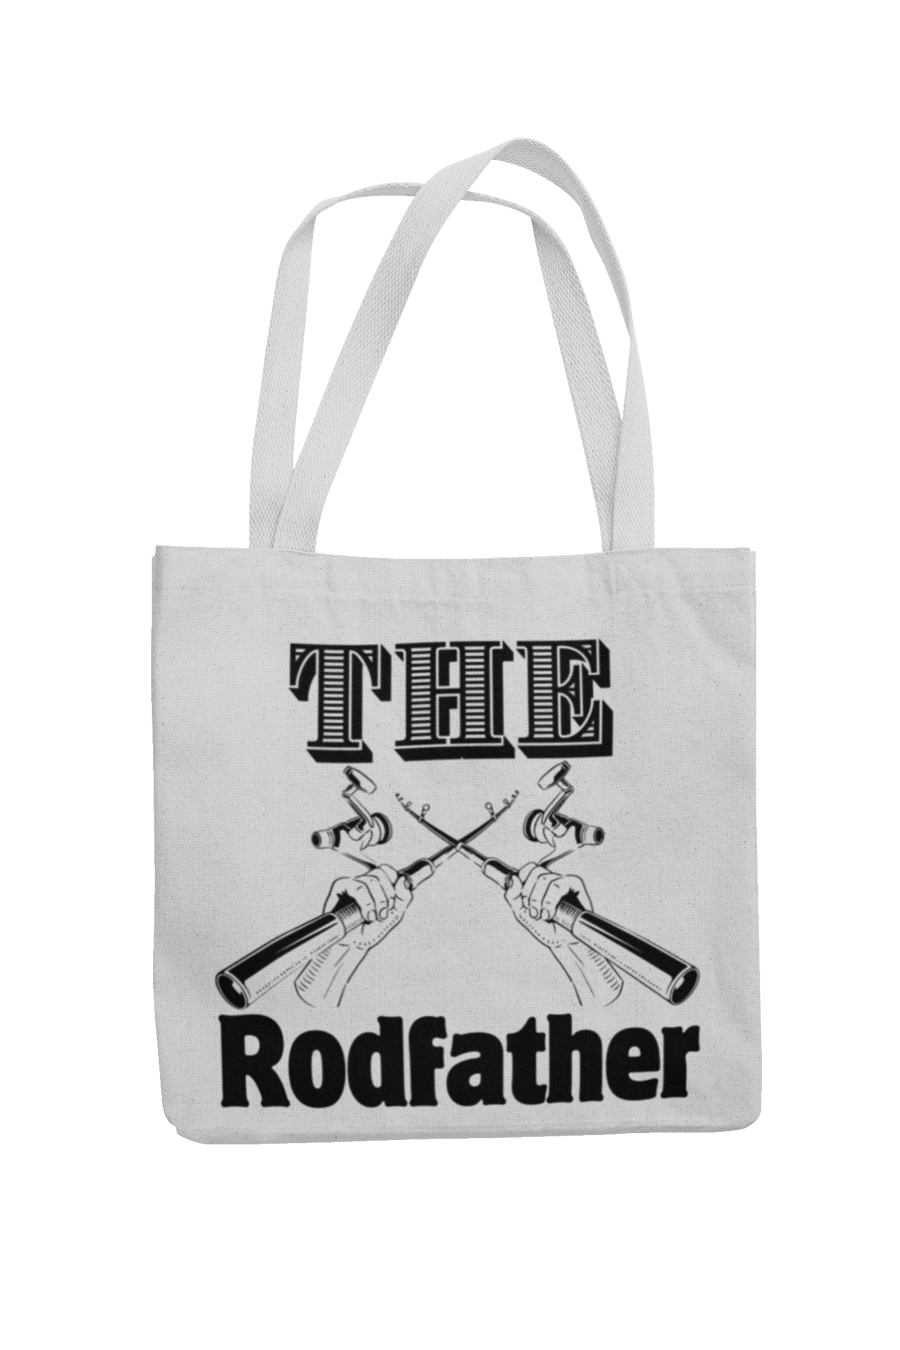 The Rod Father - Funny Novelty Fishing themed Tote Bag